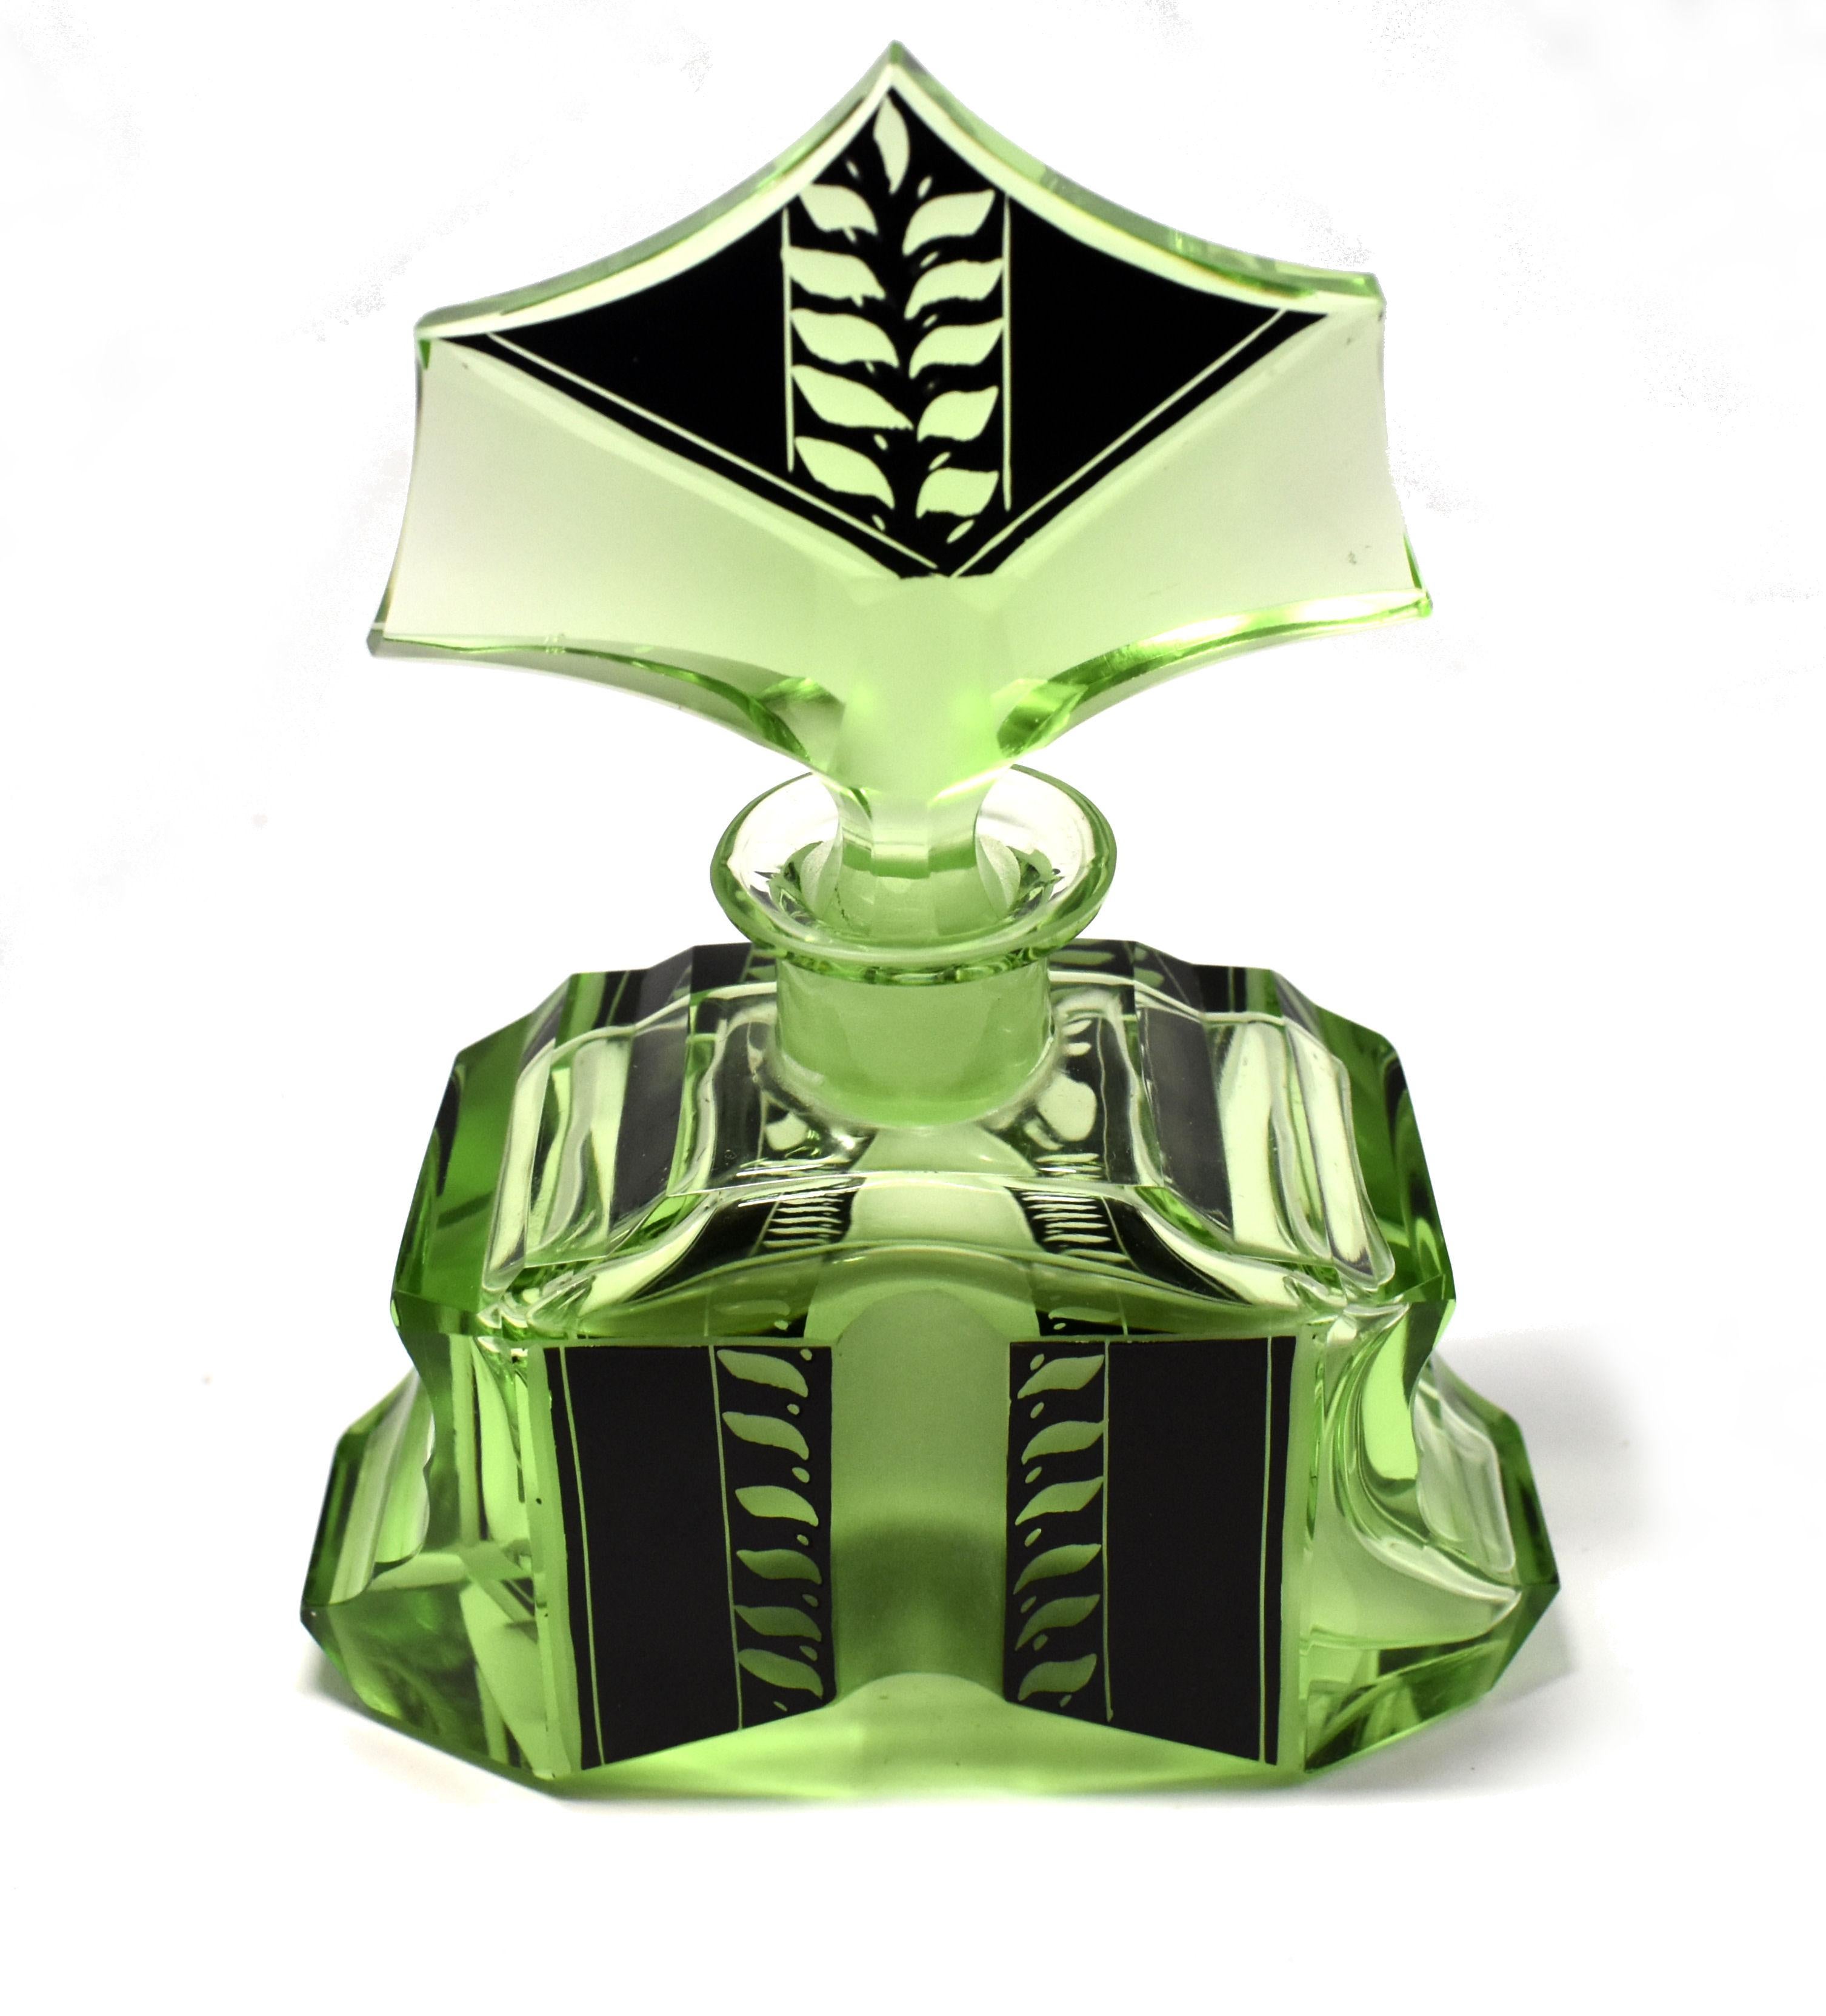 For your consideration is this large Art Deco cut glass perfume bottle by Karl Palda. Fabulous shape and design. Larger than regular perfume bottles this beautiful example will make a perfect accompaniment to any dressing table or bathroom setting.